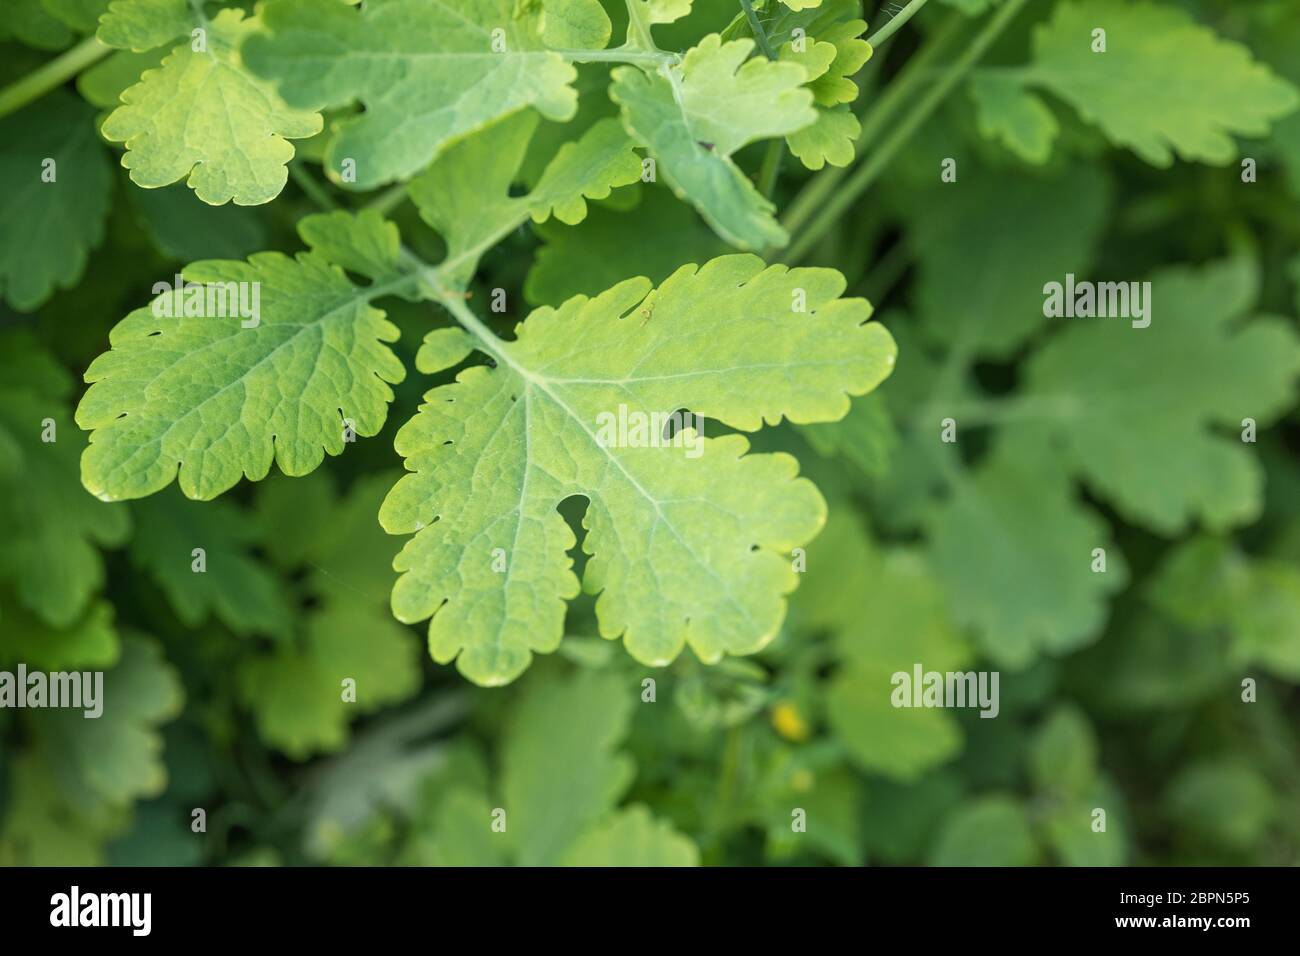 Close shot of leaves of Greater Celandine / Chelidonium majus in shade, & showing distinct leaf margin. Former medicinal plant with vivid yellow sap. Stock Photo